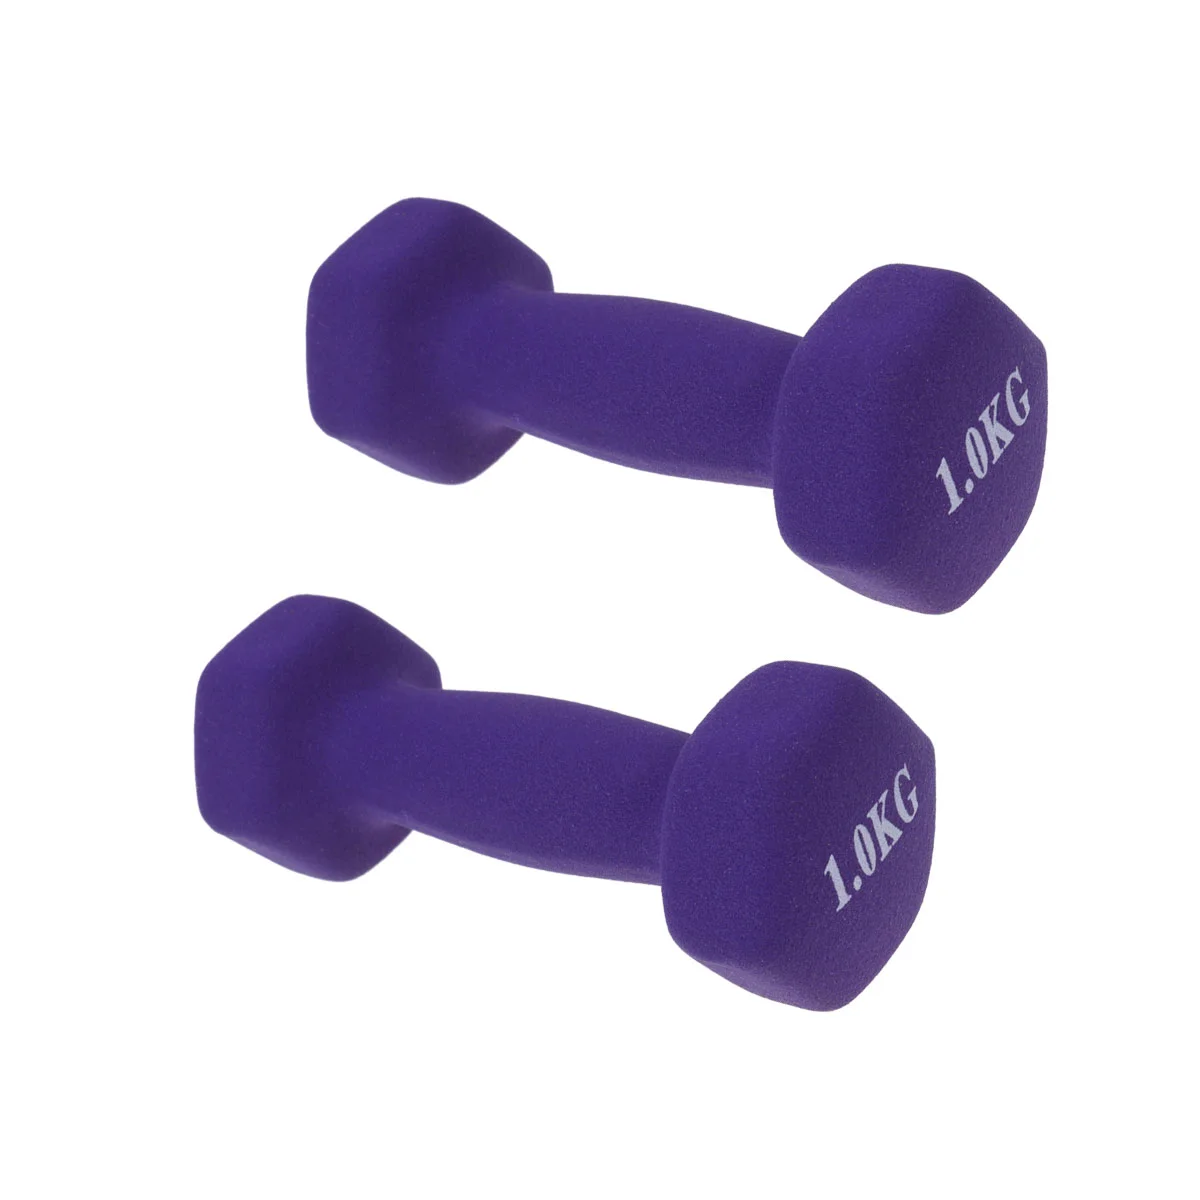 Dumbbells Women Barbells Yoga Weights Exercise Home Fitness Dumbbell Arm Gym Set Workout Barbelllady Sets Equipment Workouts